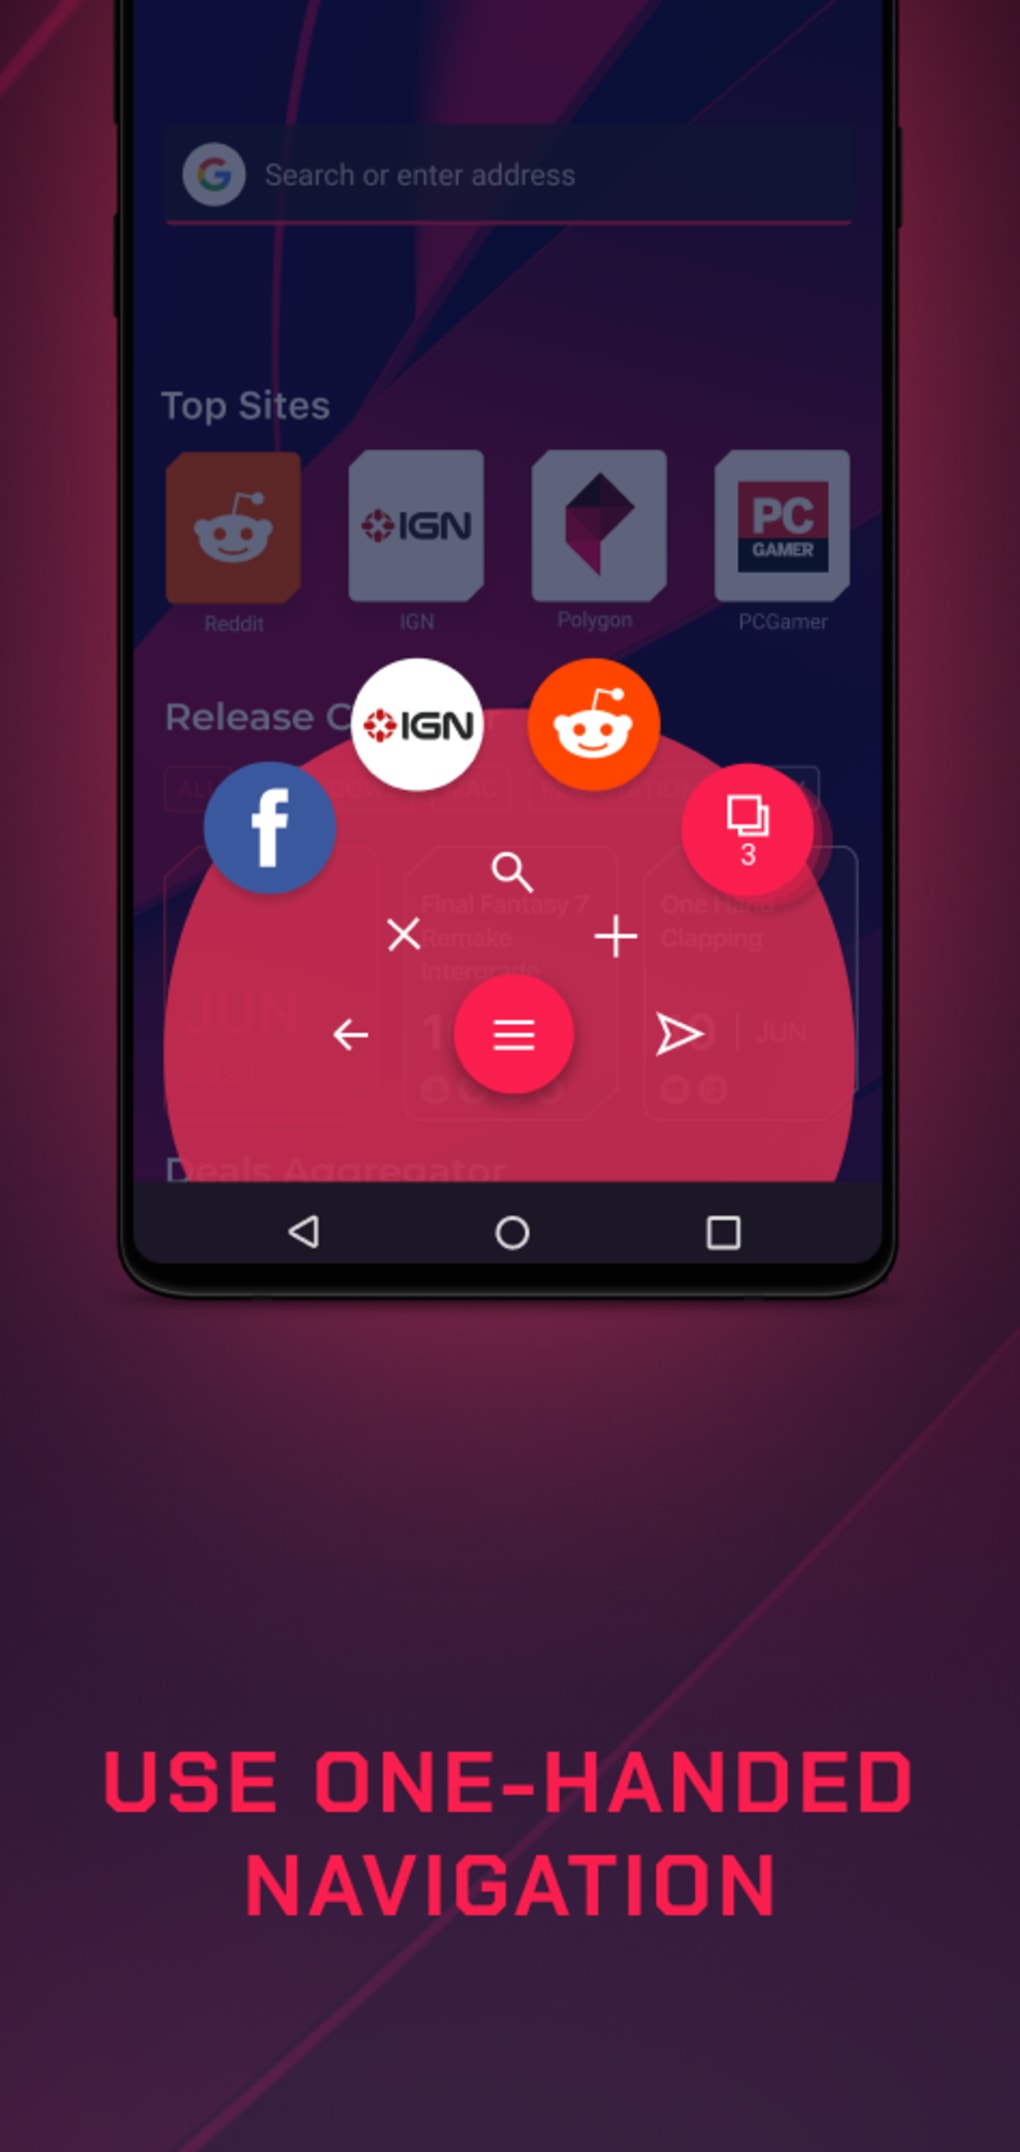 Opera GX: Gaming Browser - Apps on Google Play